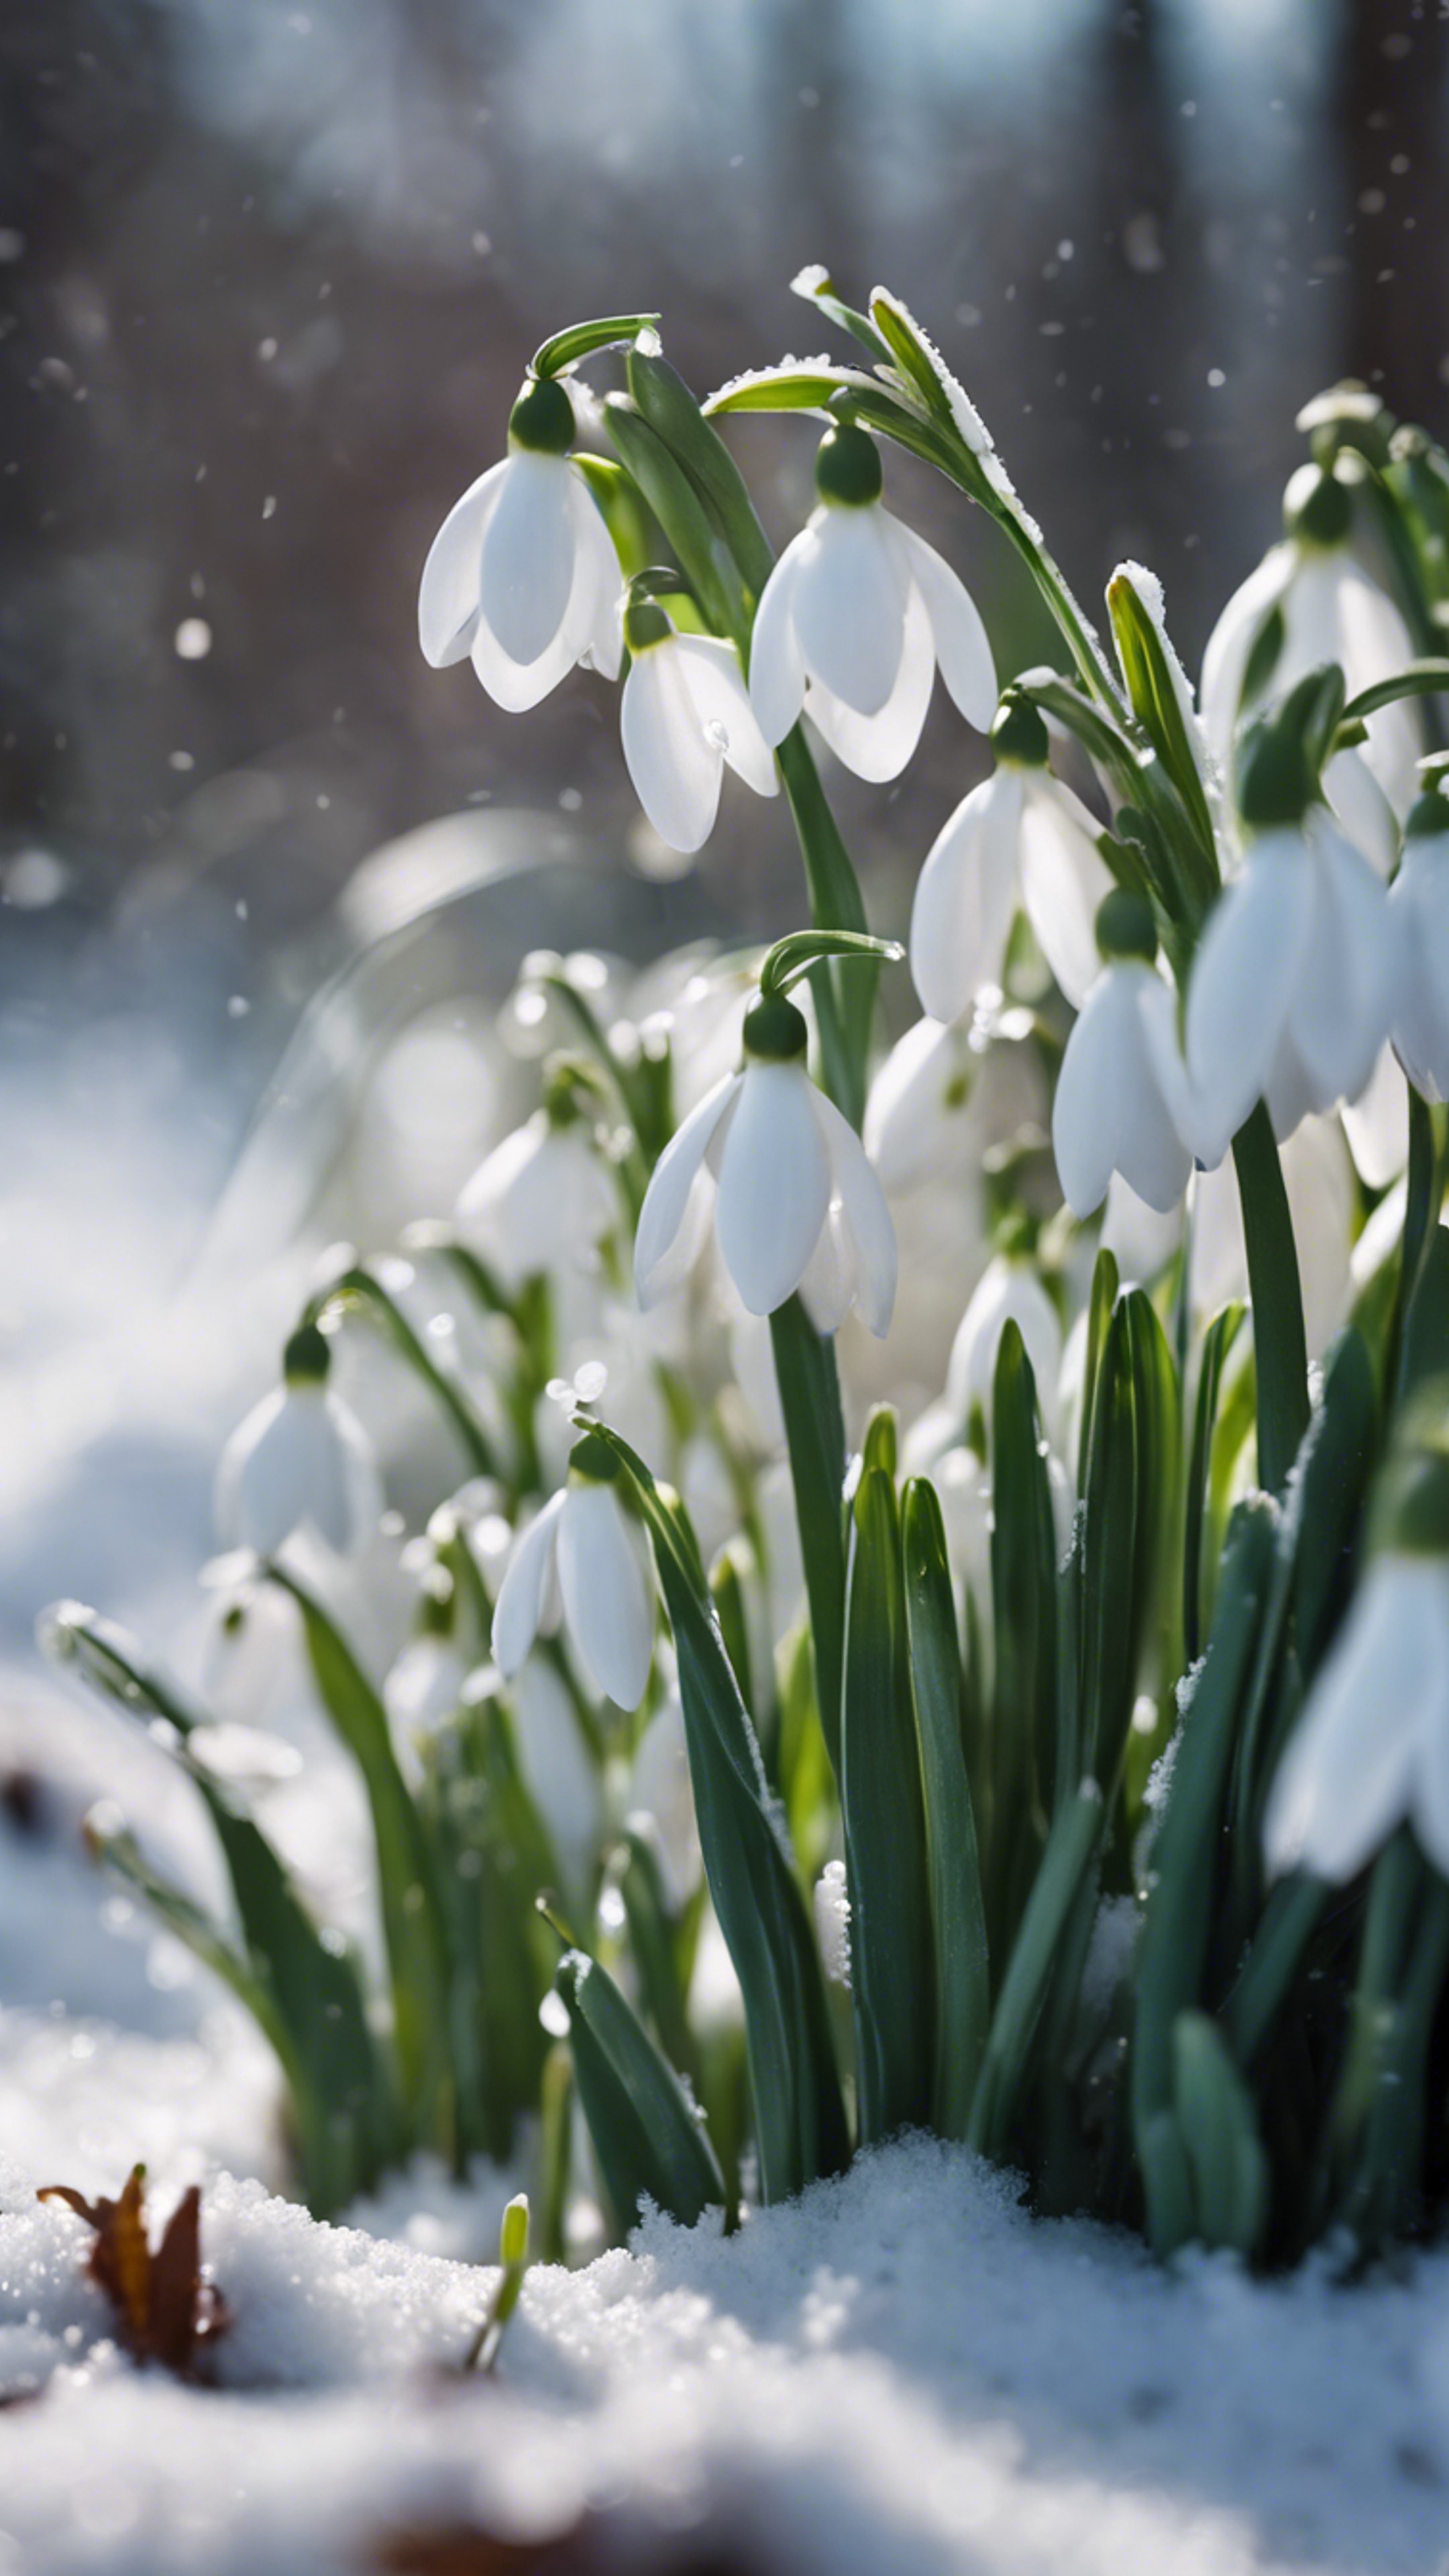 A patch of white snowdrops peeking through a dusting of late spring snow. Hintergrund[e64c535efd0a459c9840]